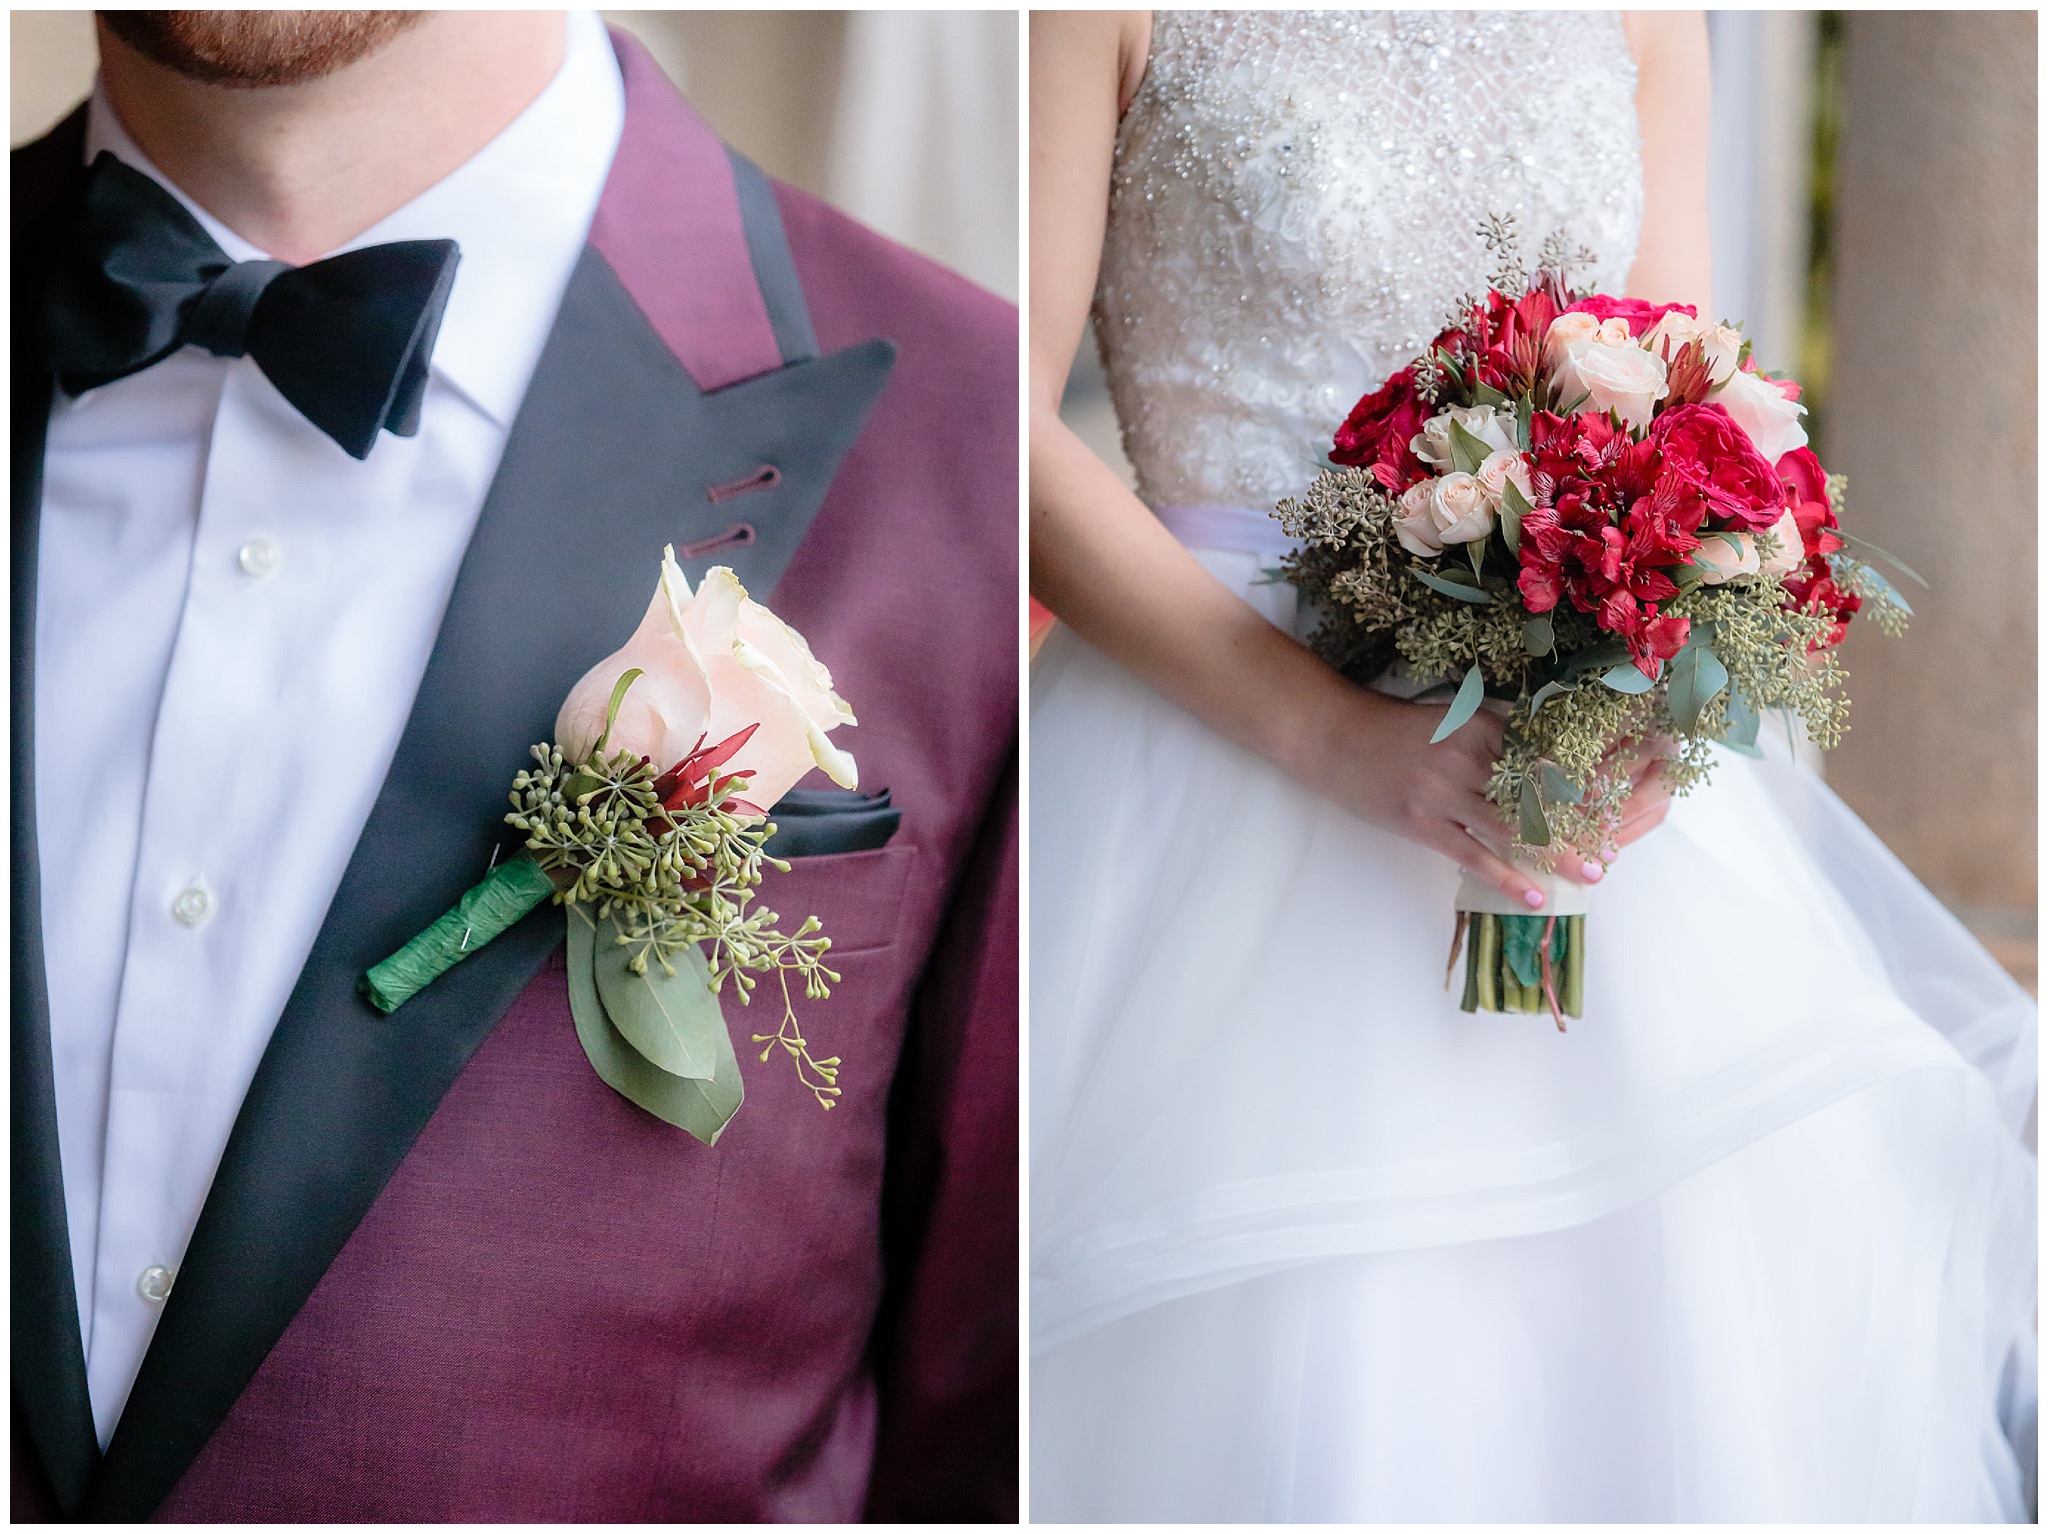 Rose boutonniere and red bouquet by Wallace Bethel Park Flowers